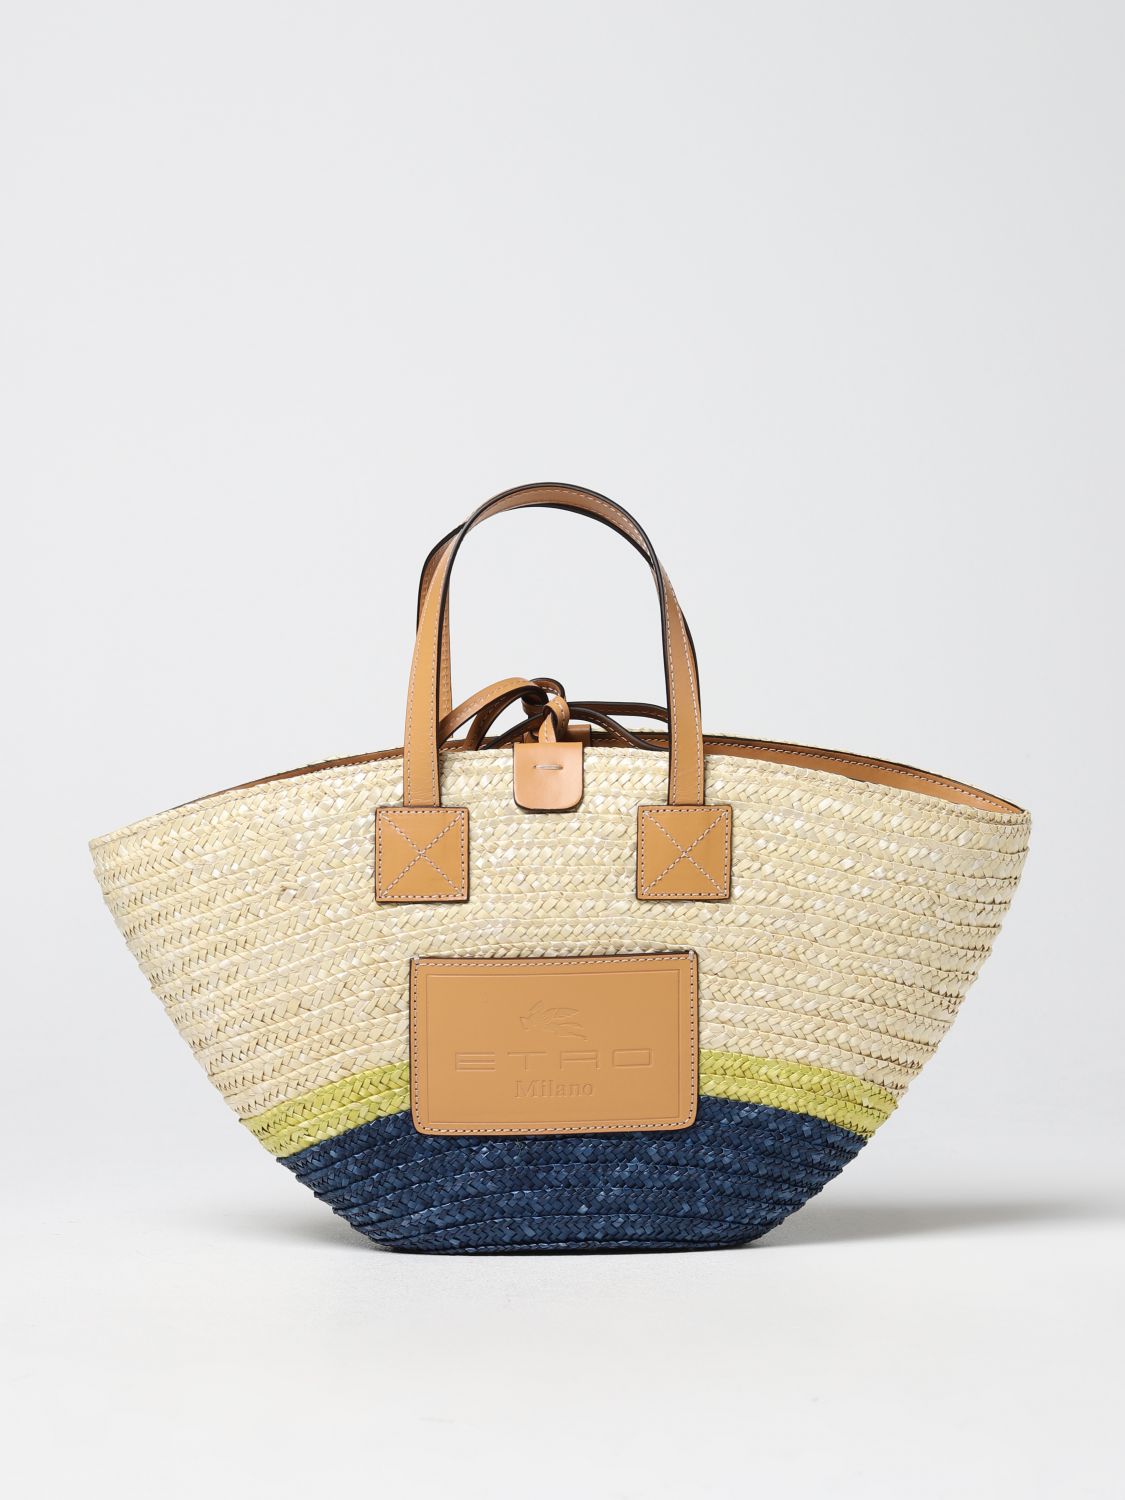 Etro tote bag in woven straw